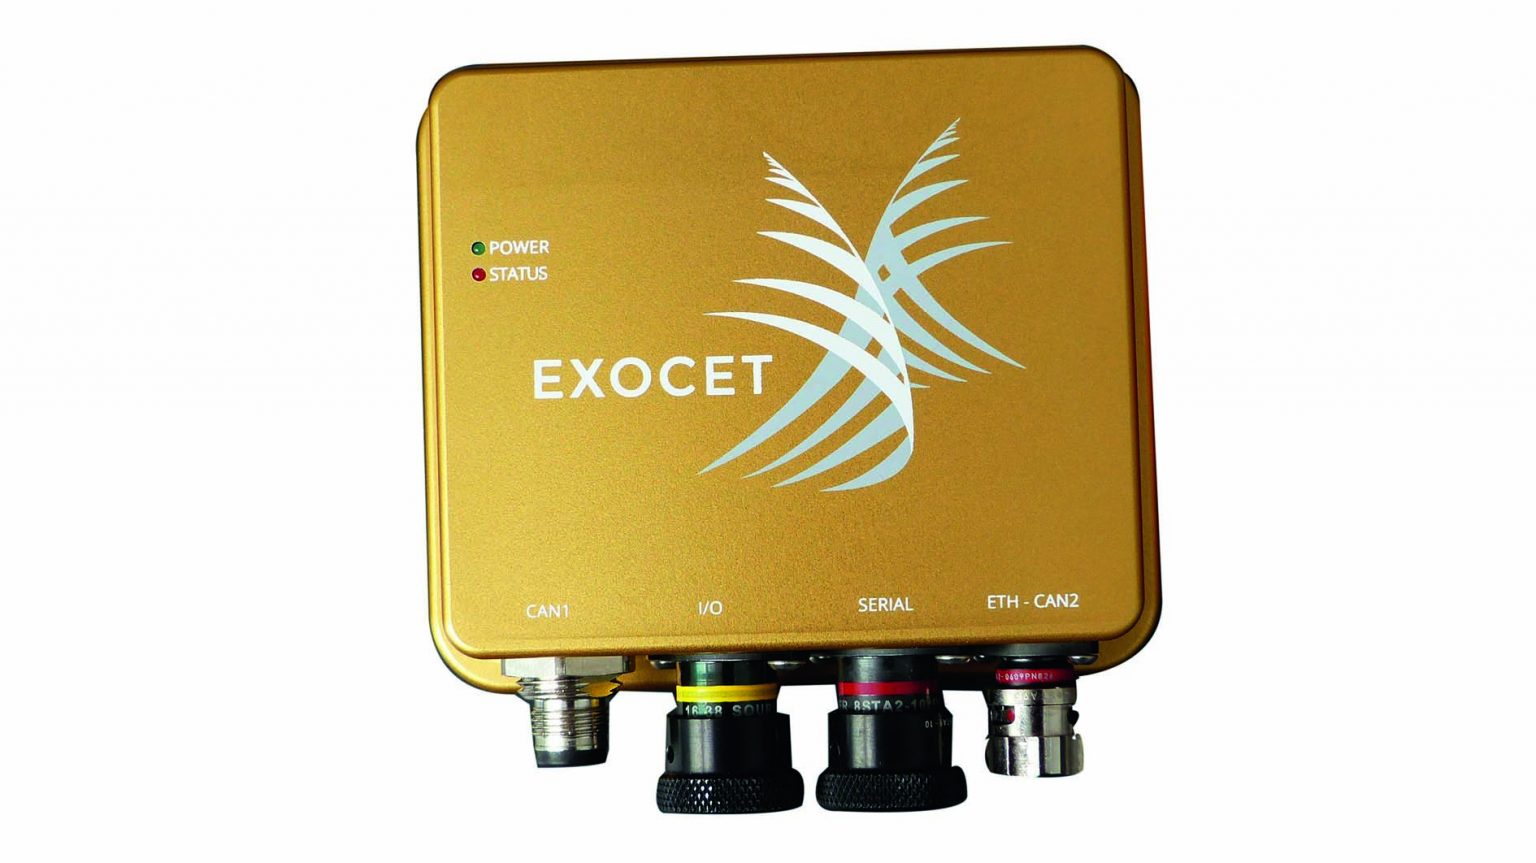 Product shot for Exocet Gold